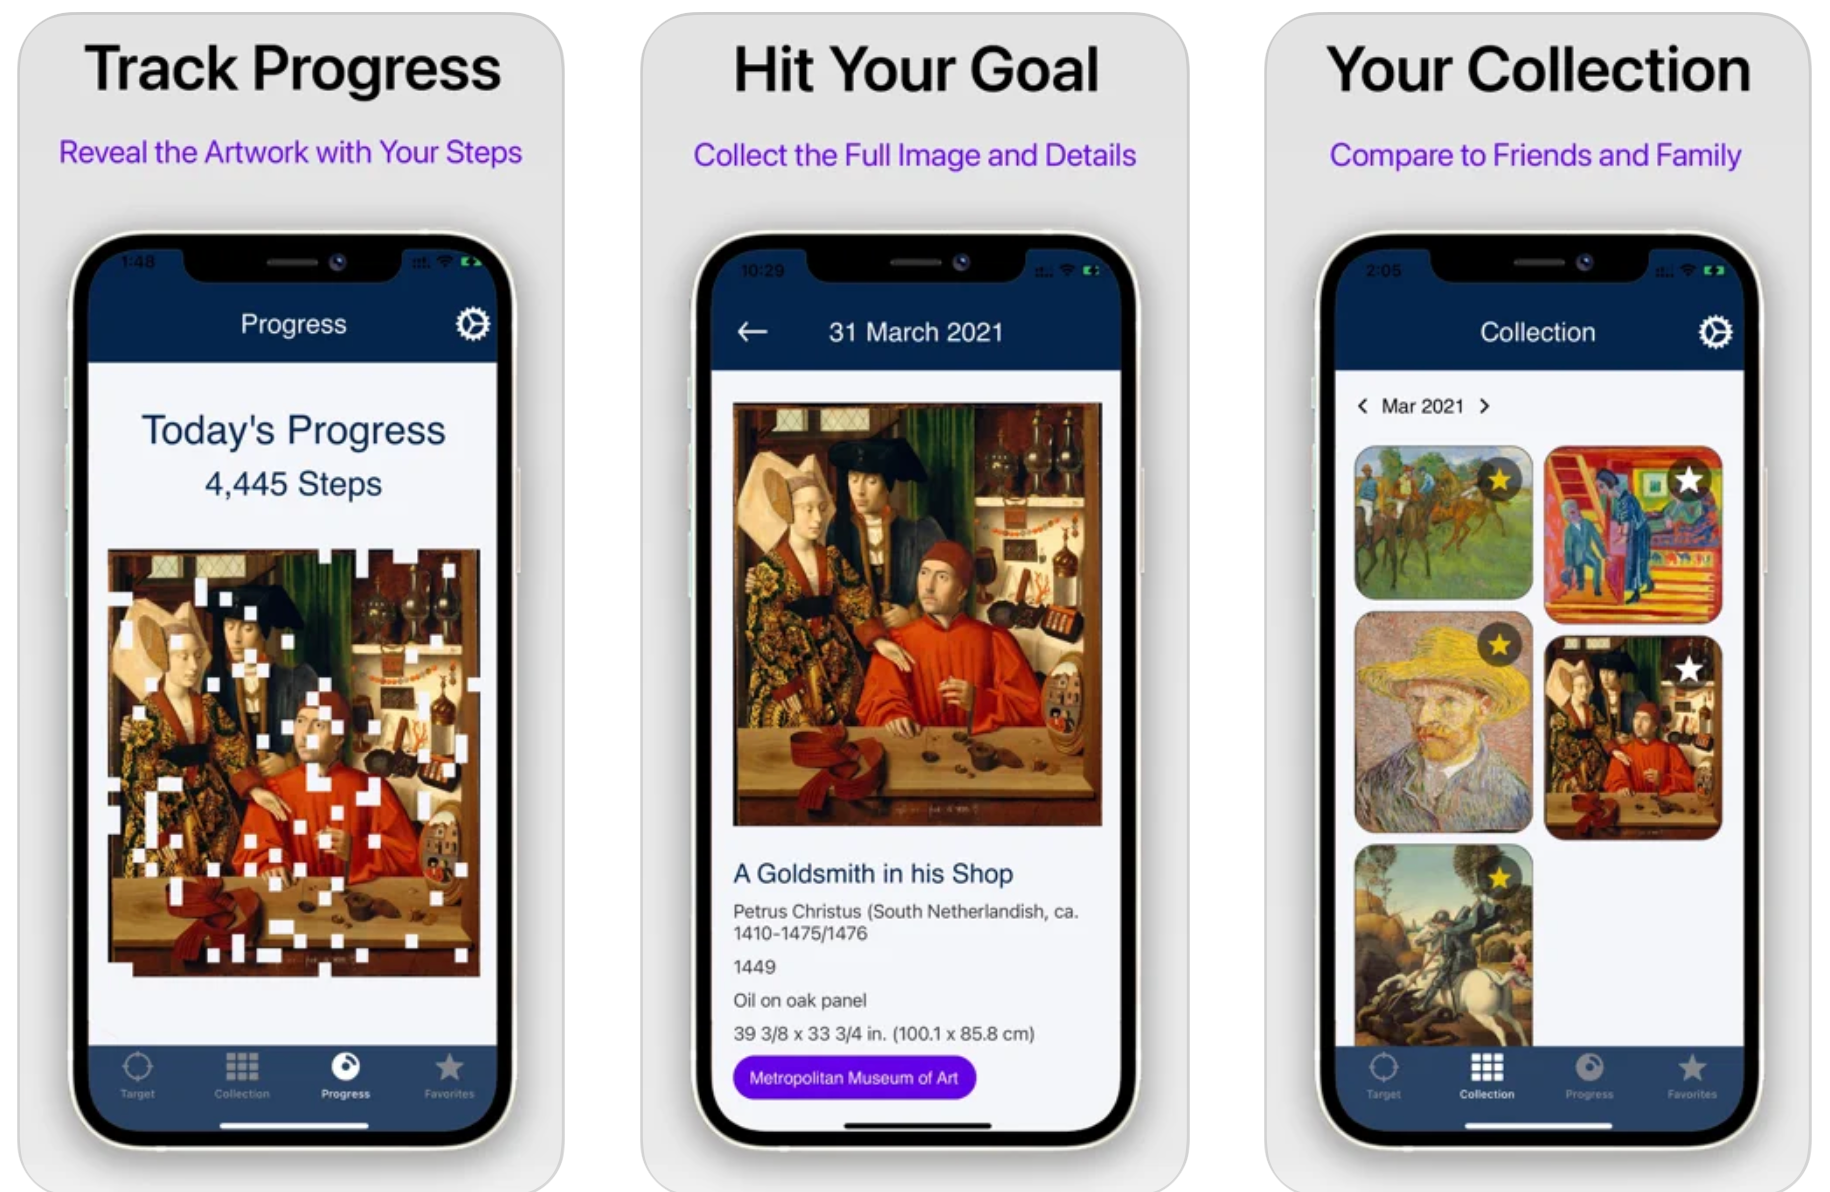 Art+Steps, Greg, Halbestunde, and other apps to check out this weekend